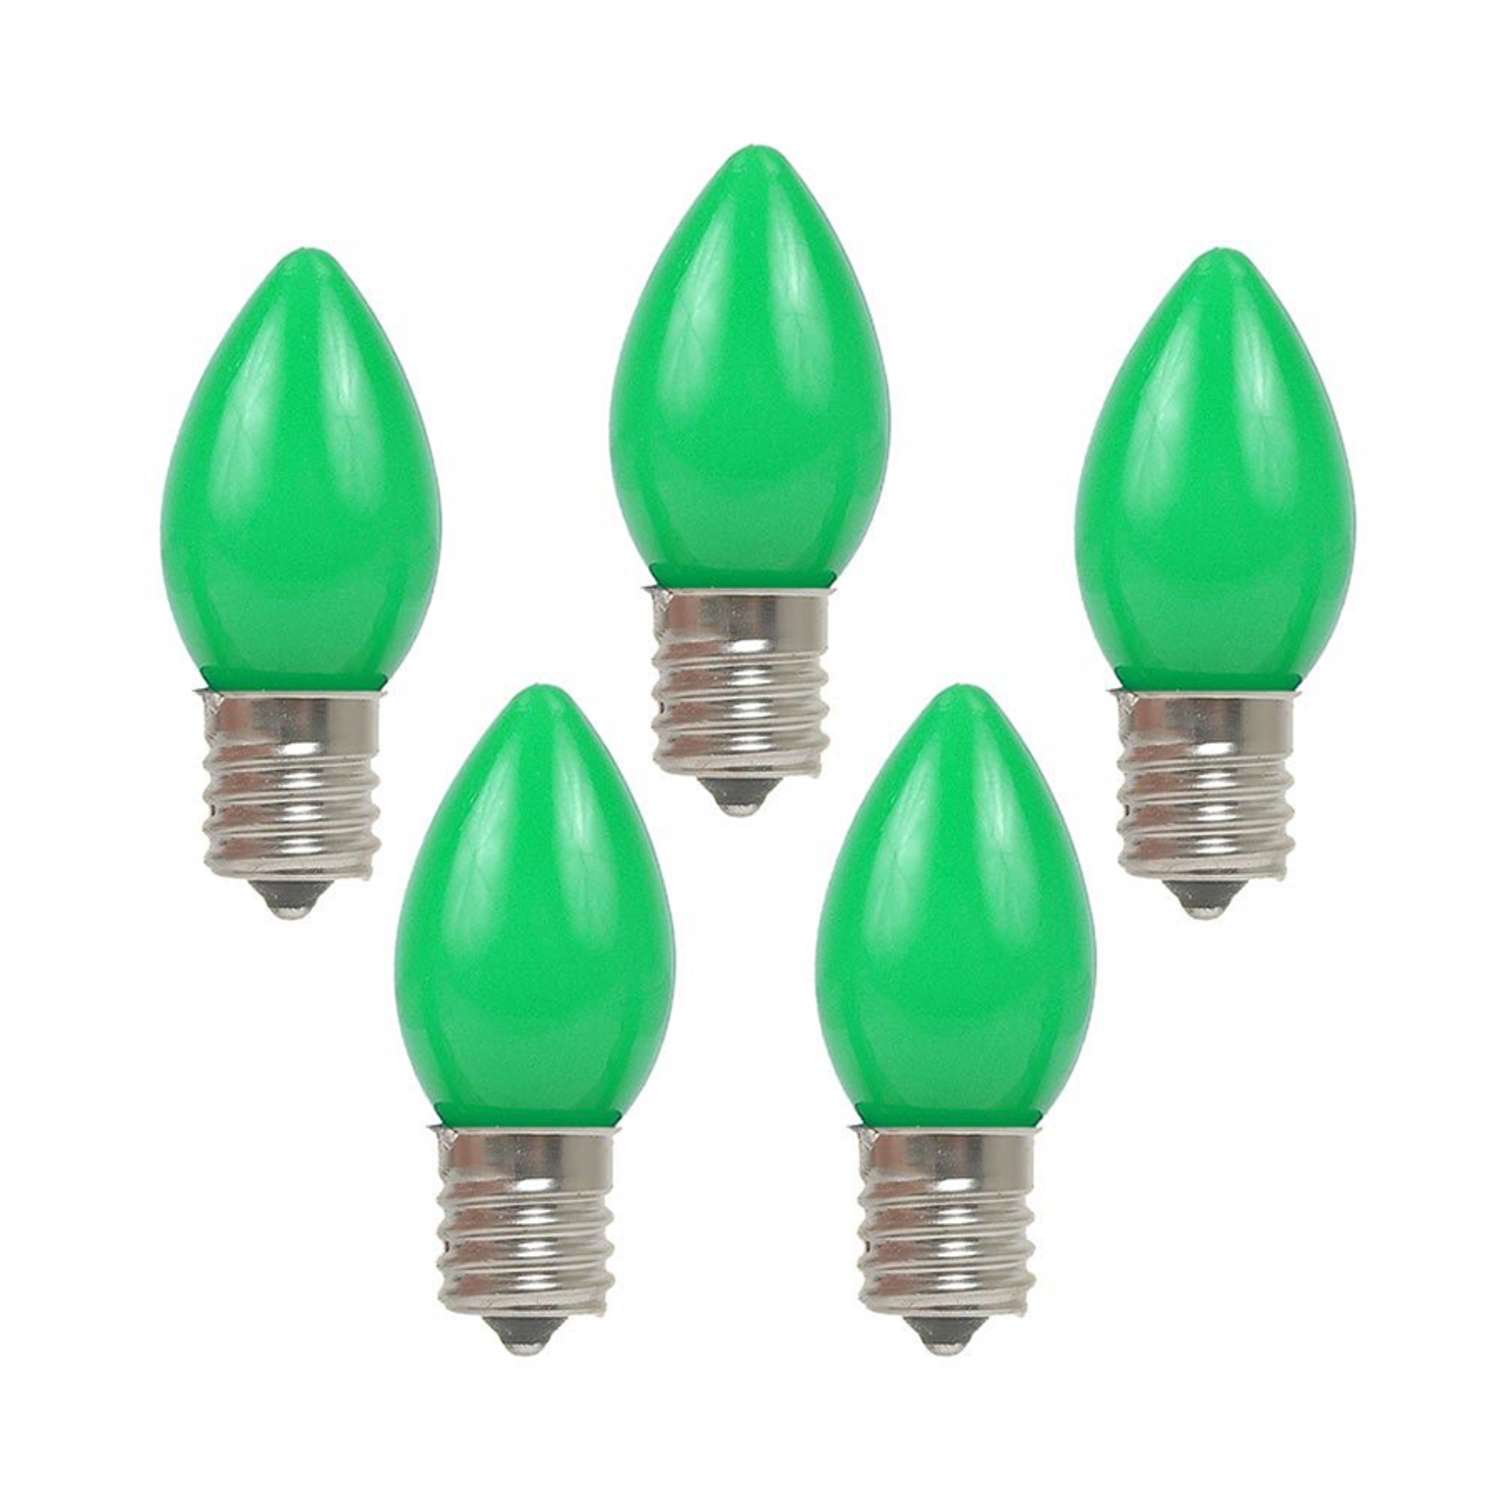 Holiday Bright Lights C7 Christmas Light Bulbs Green 1 in. 25 lights Ace Hardware